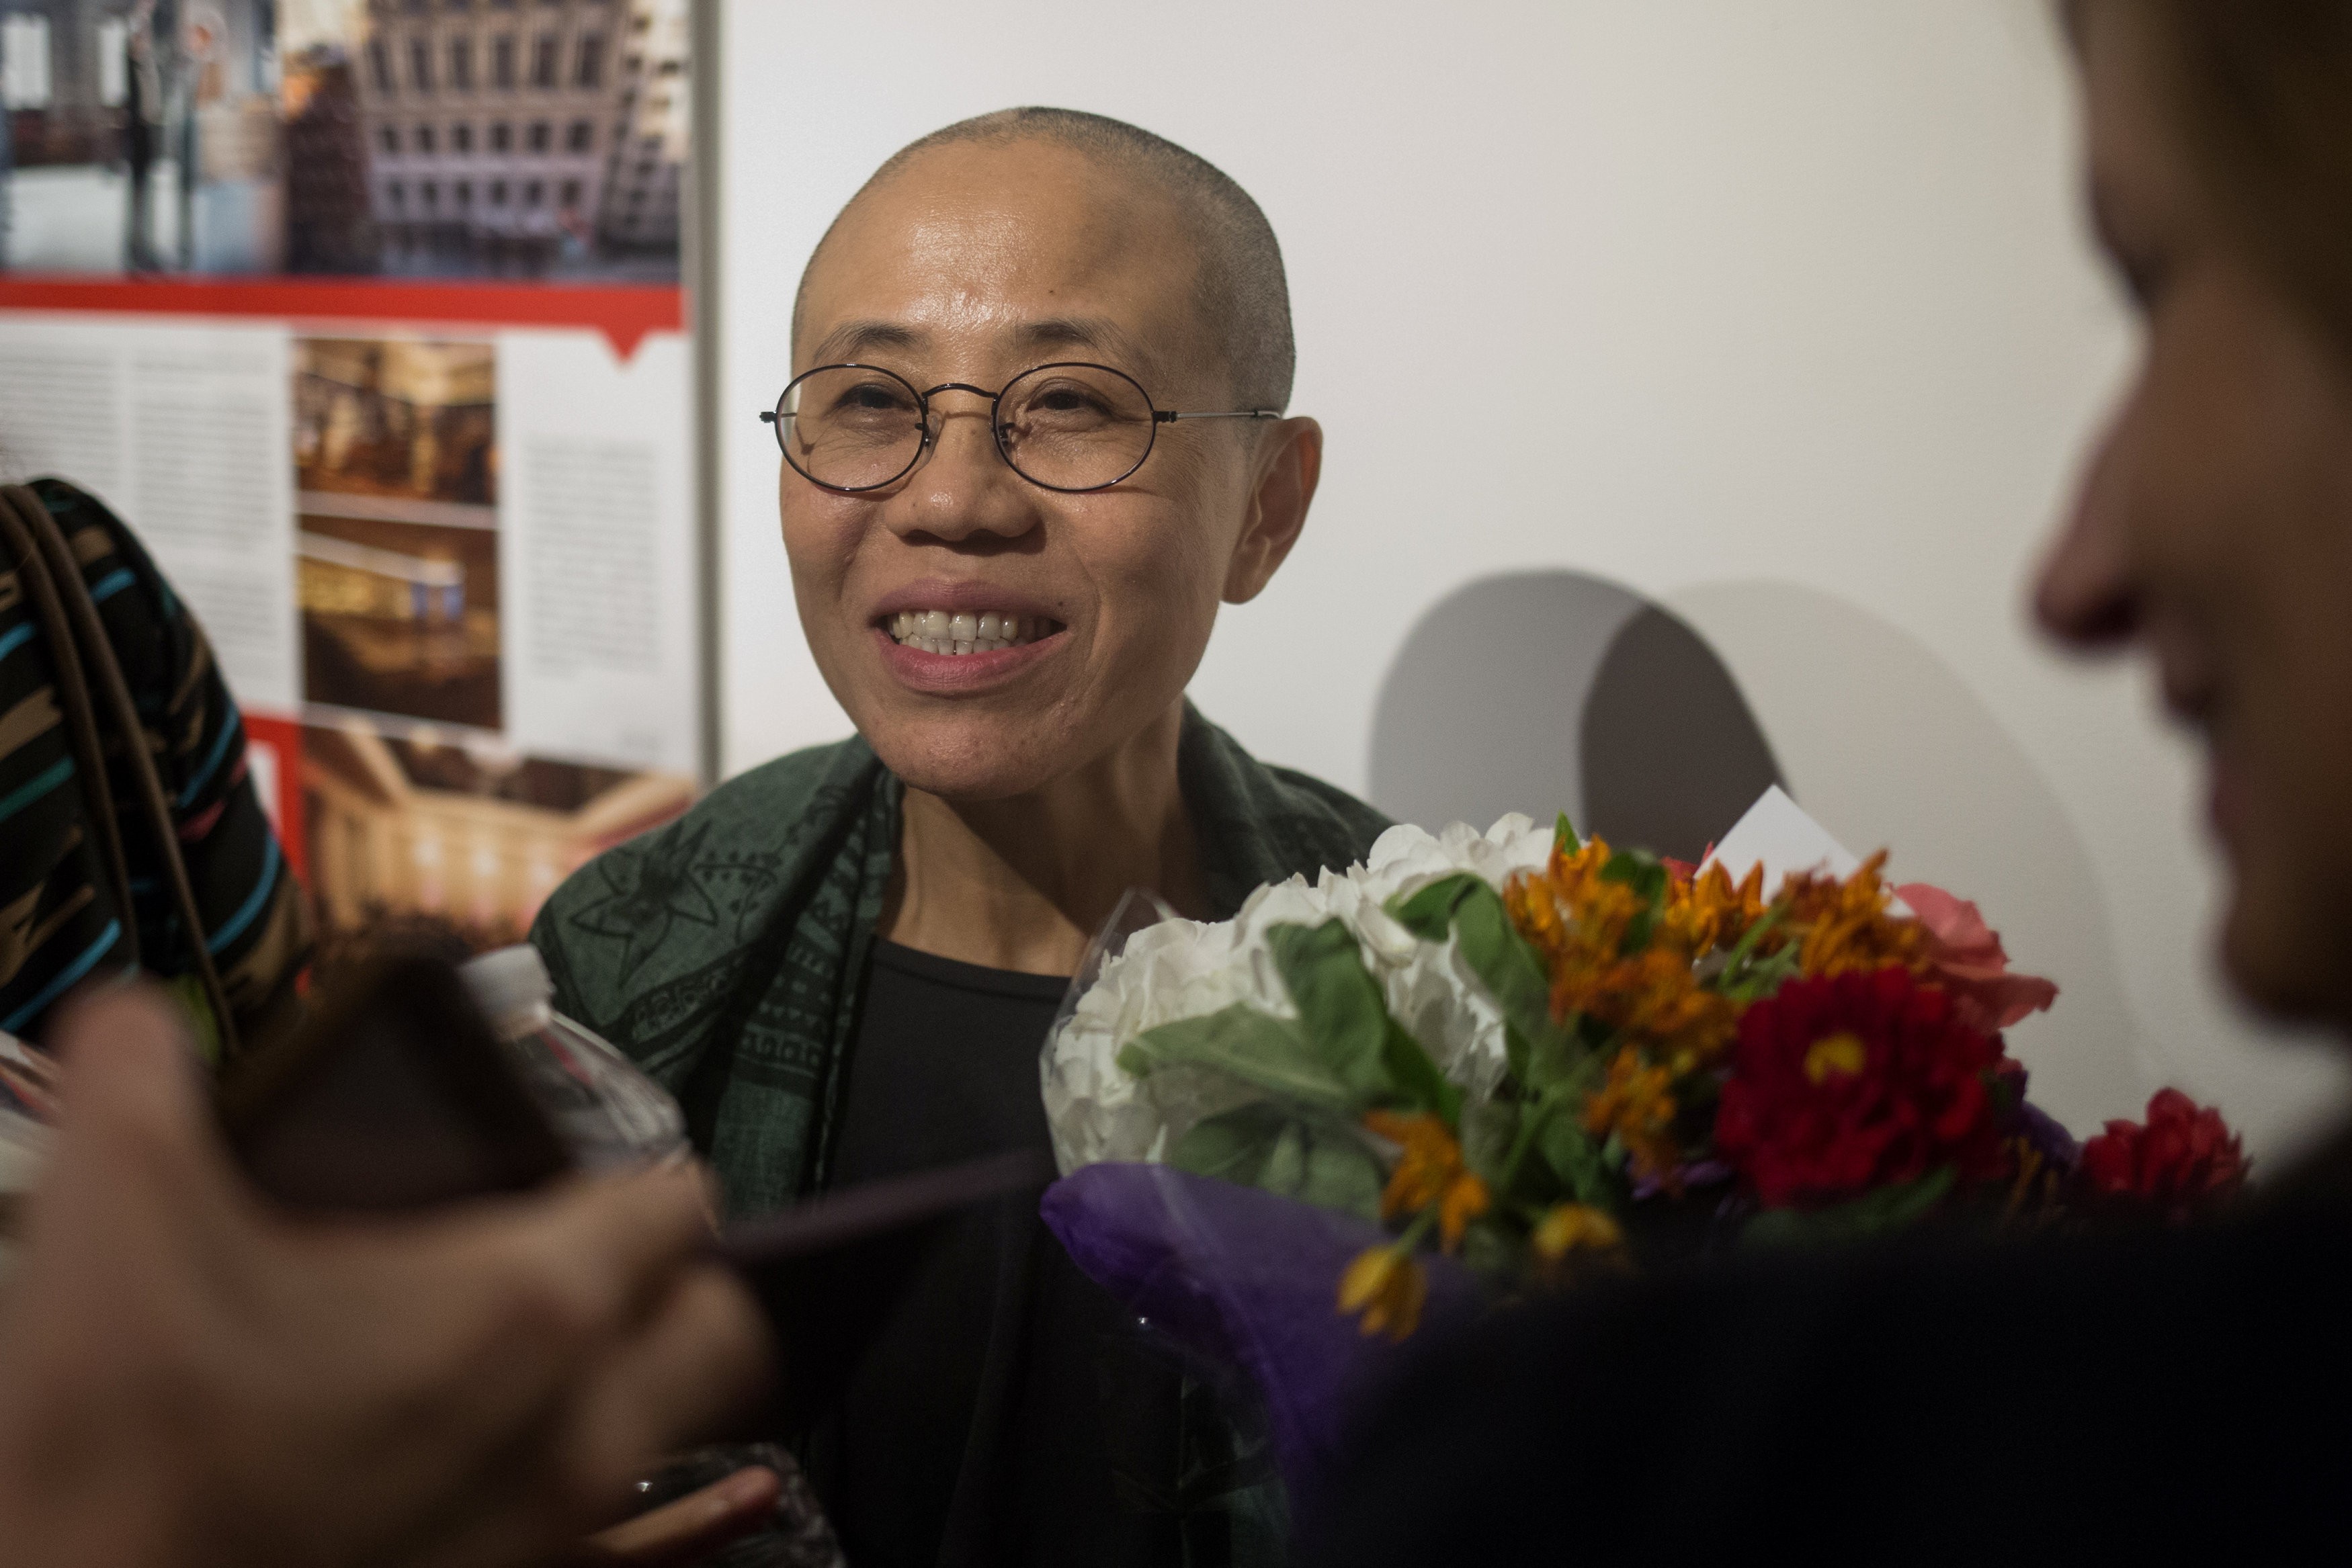 The writer and human rights advocate says the US president’s trade war may have helped Liu Xia, the widow of Nobel laureate Liu Xiaobo, win her release and move to Germany